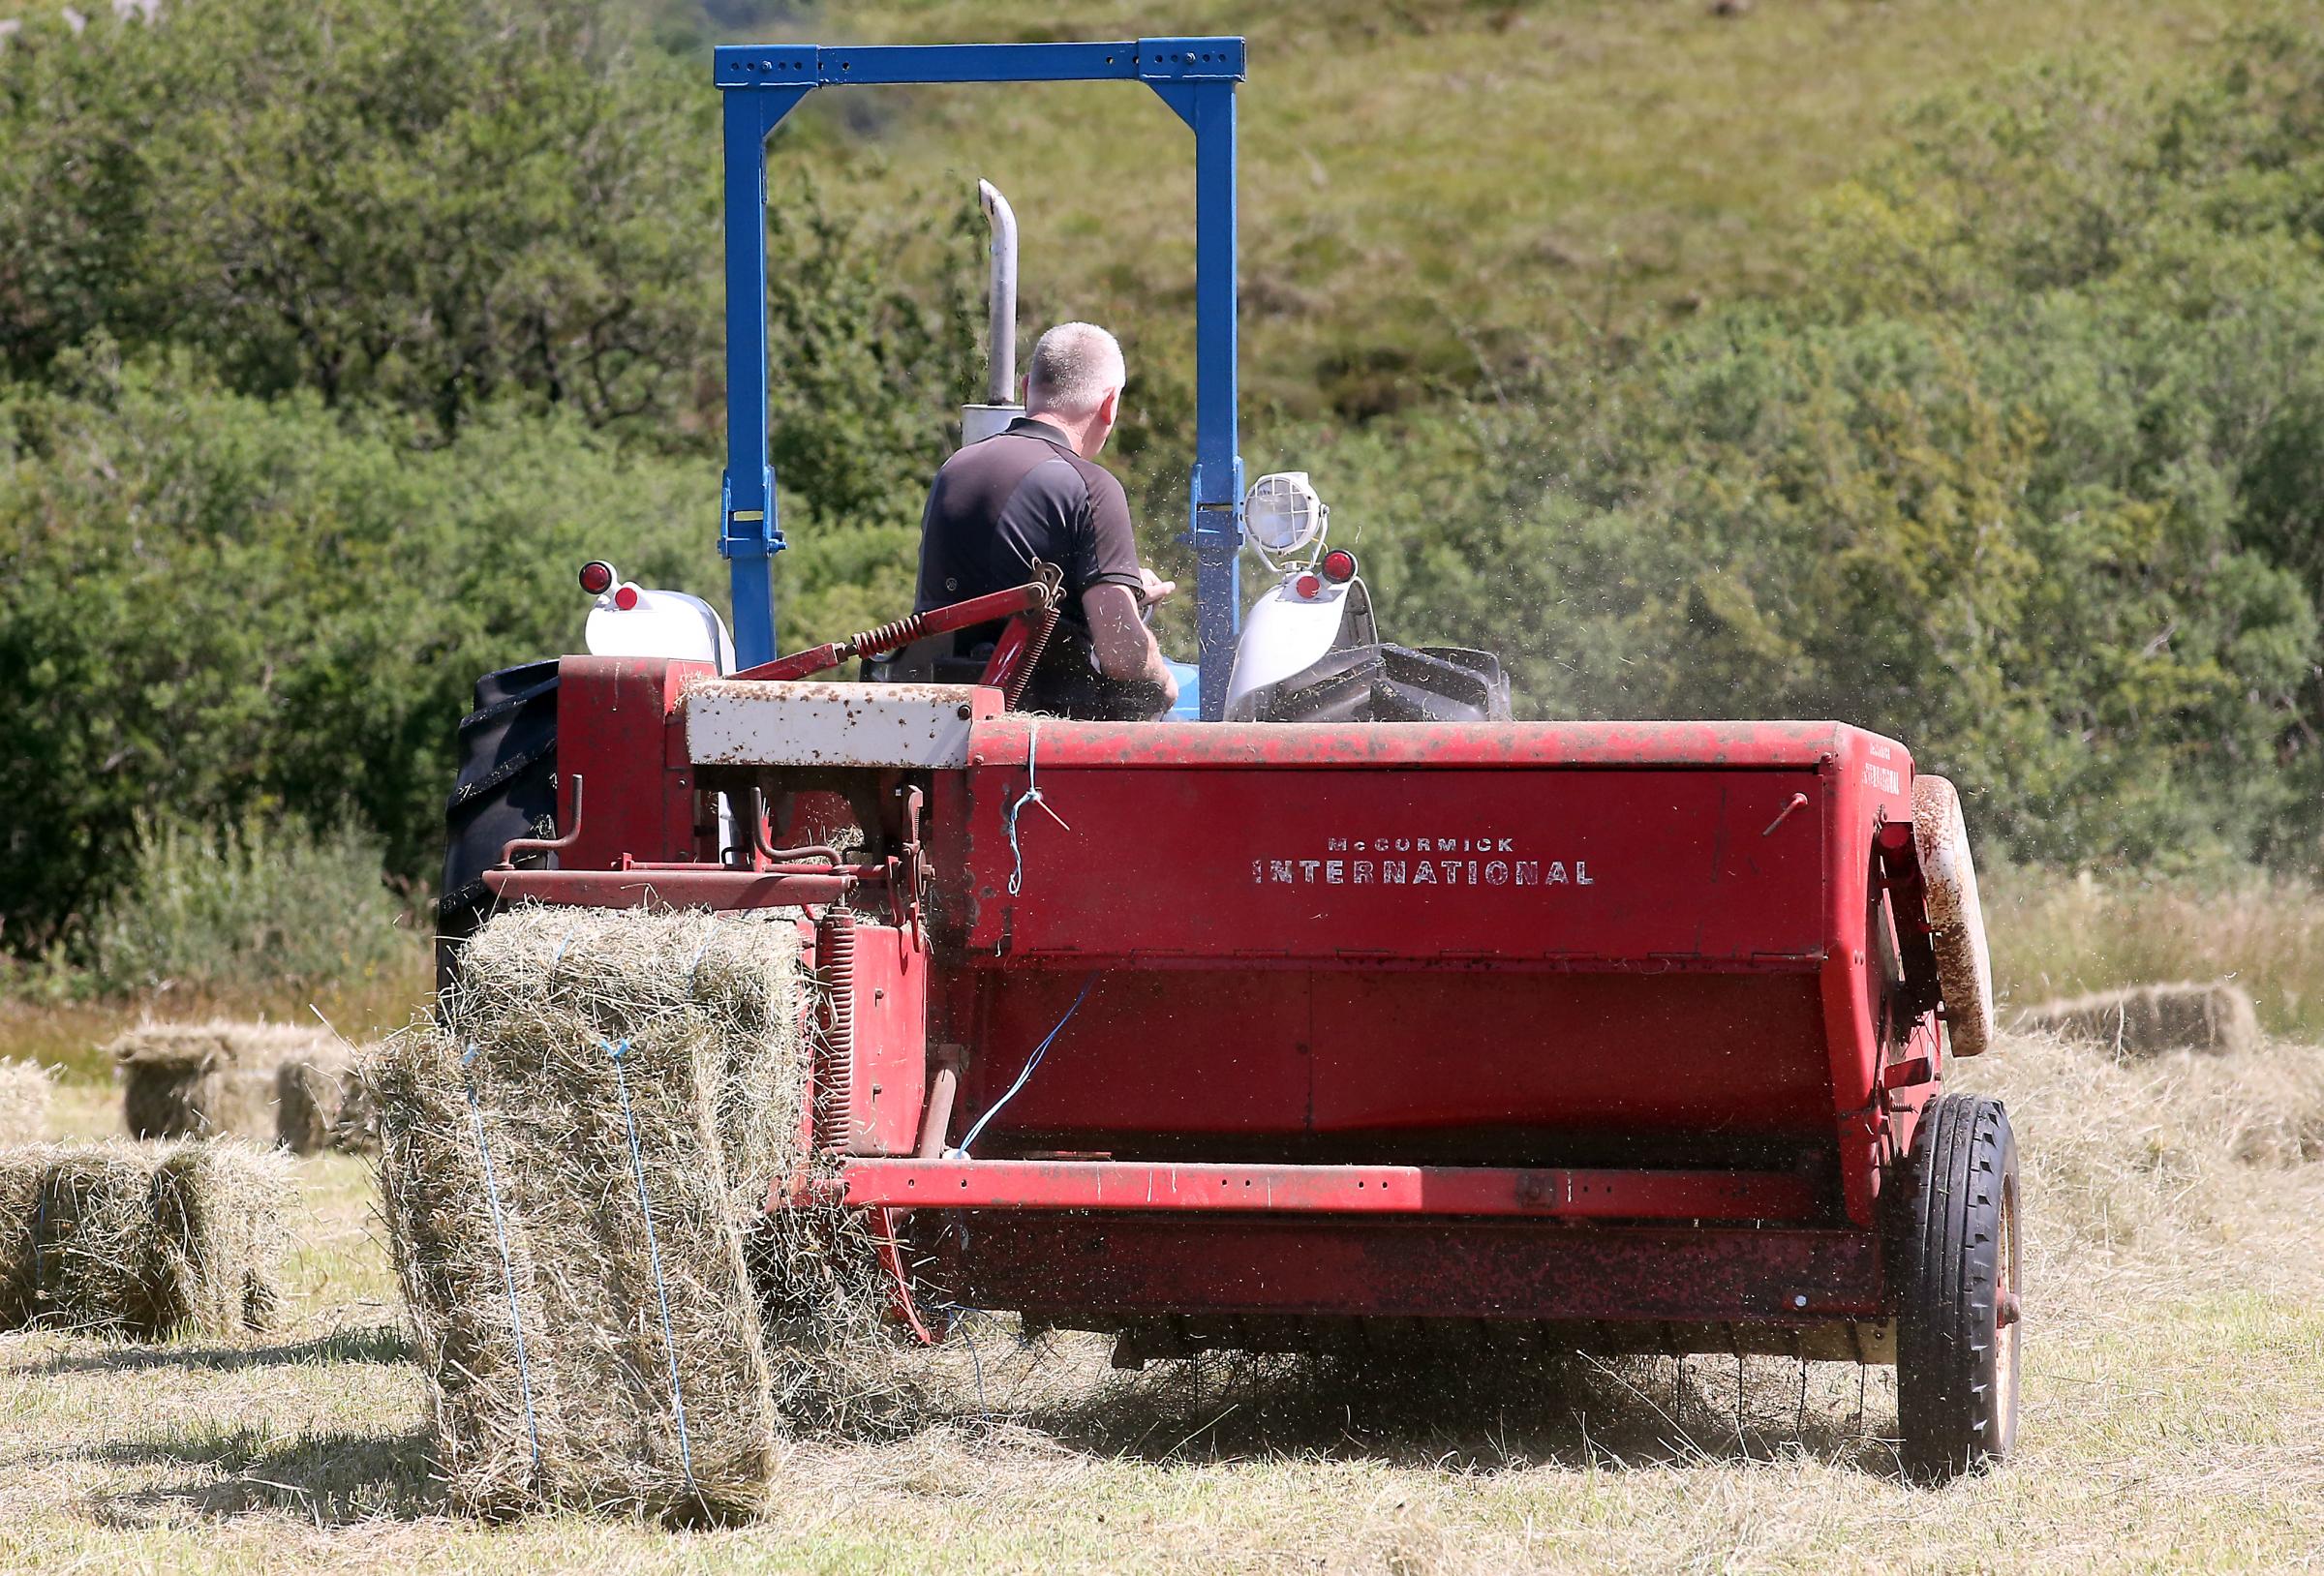 Fermanagh farmers hard at work to gather hay under a hot sun